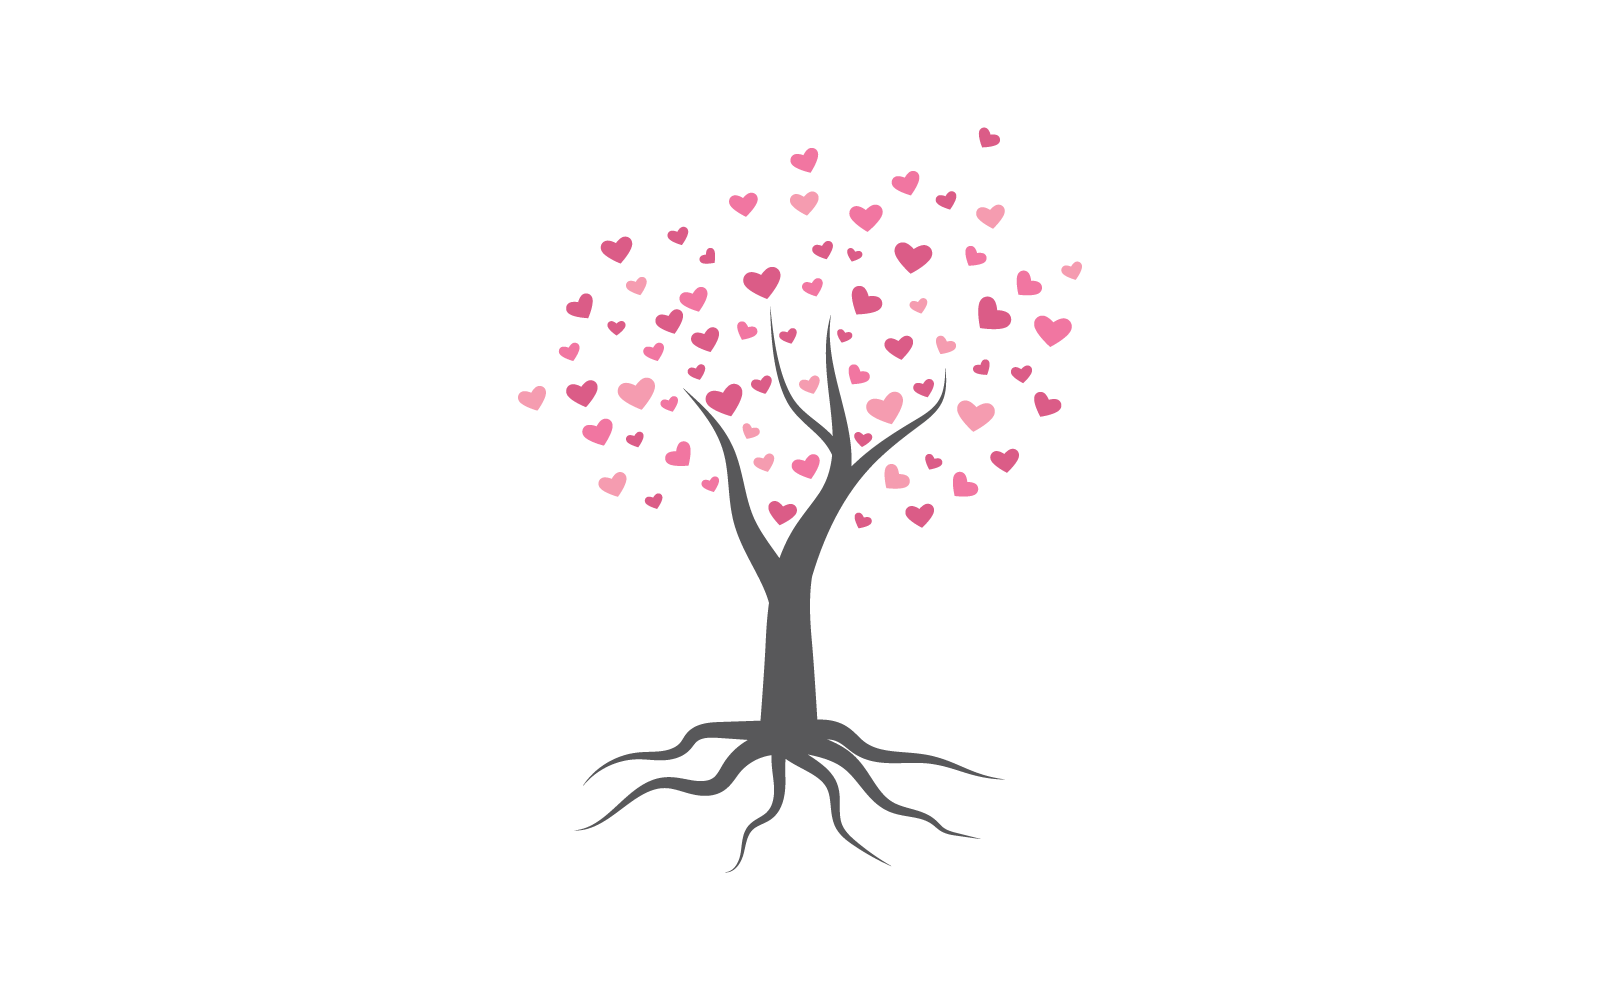 Love Tree With Heart Leaves Vector Illustration Design